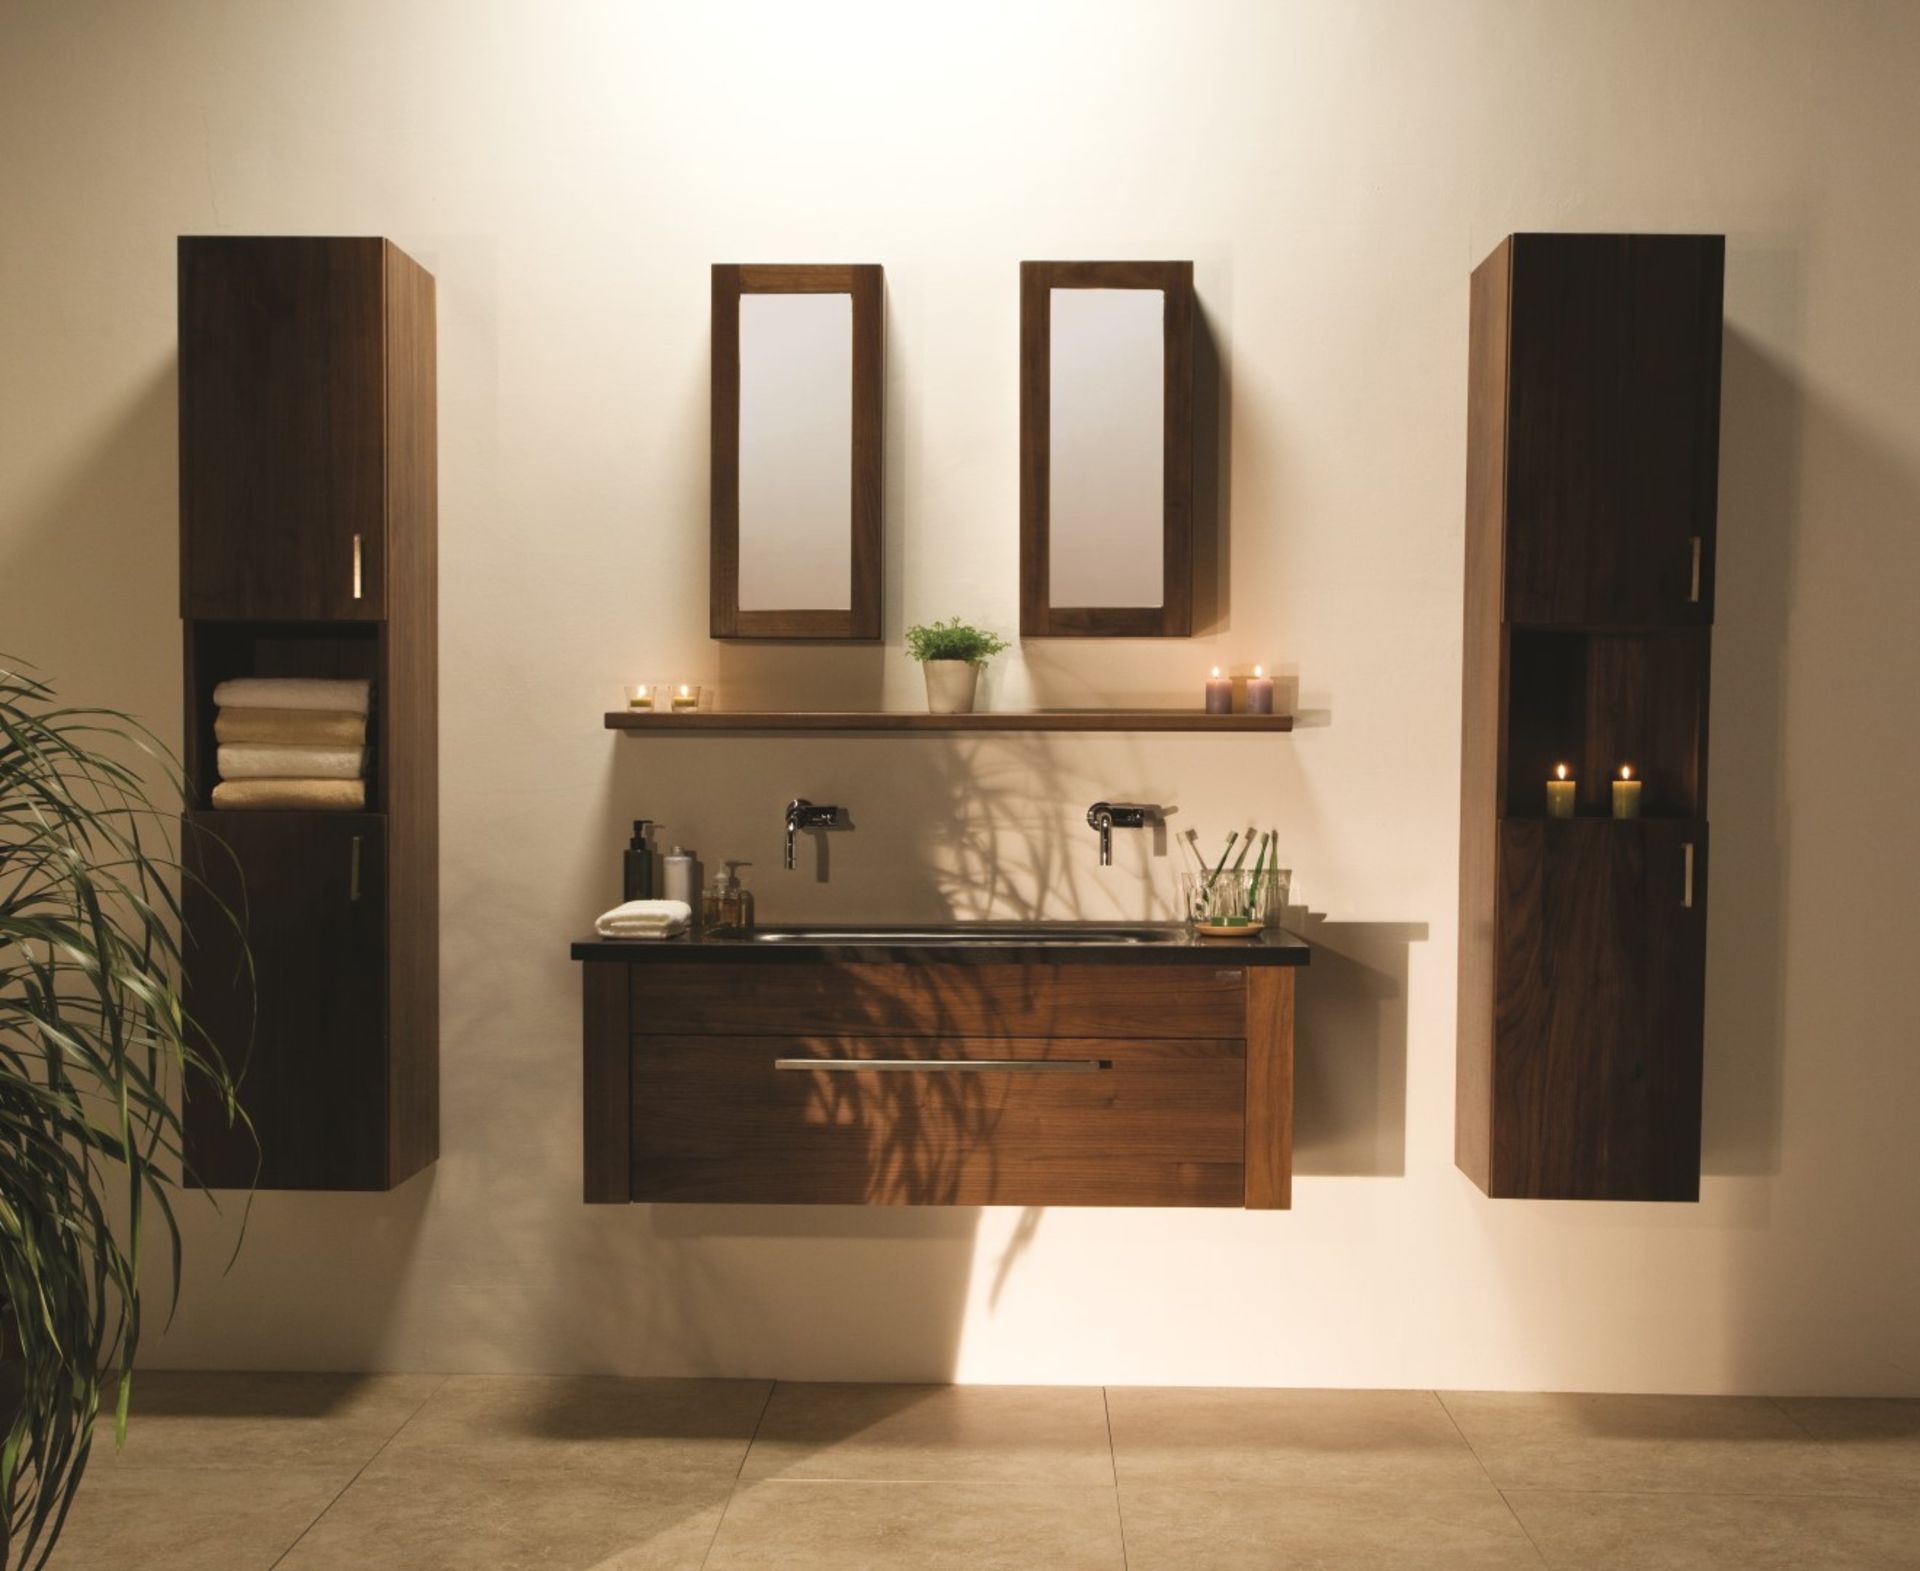 1 x Stonearth Bathroom Storage Shelf With Concealed Brackets - American Solid Walnut - Size: 1200mm - Image 2 of 12